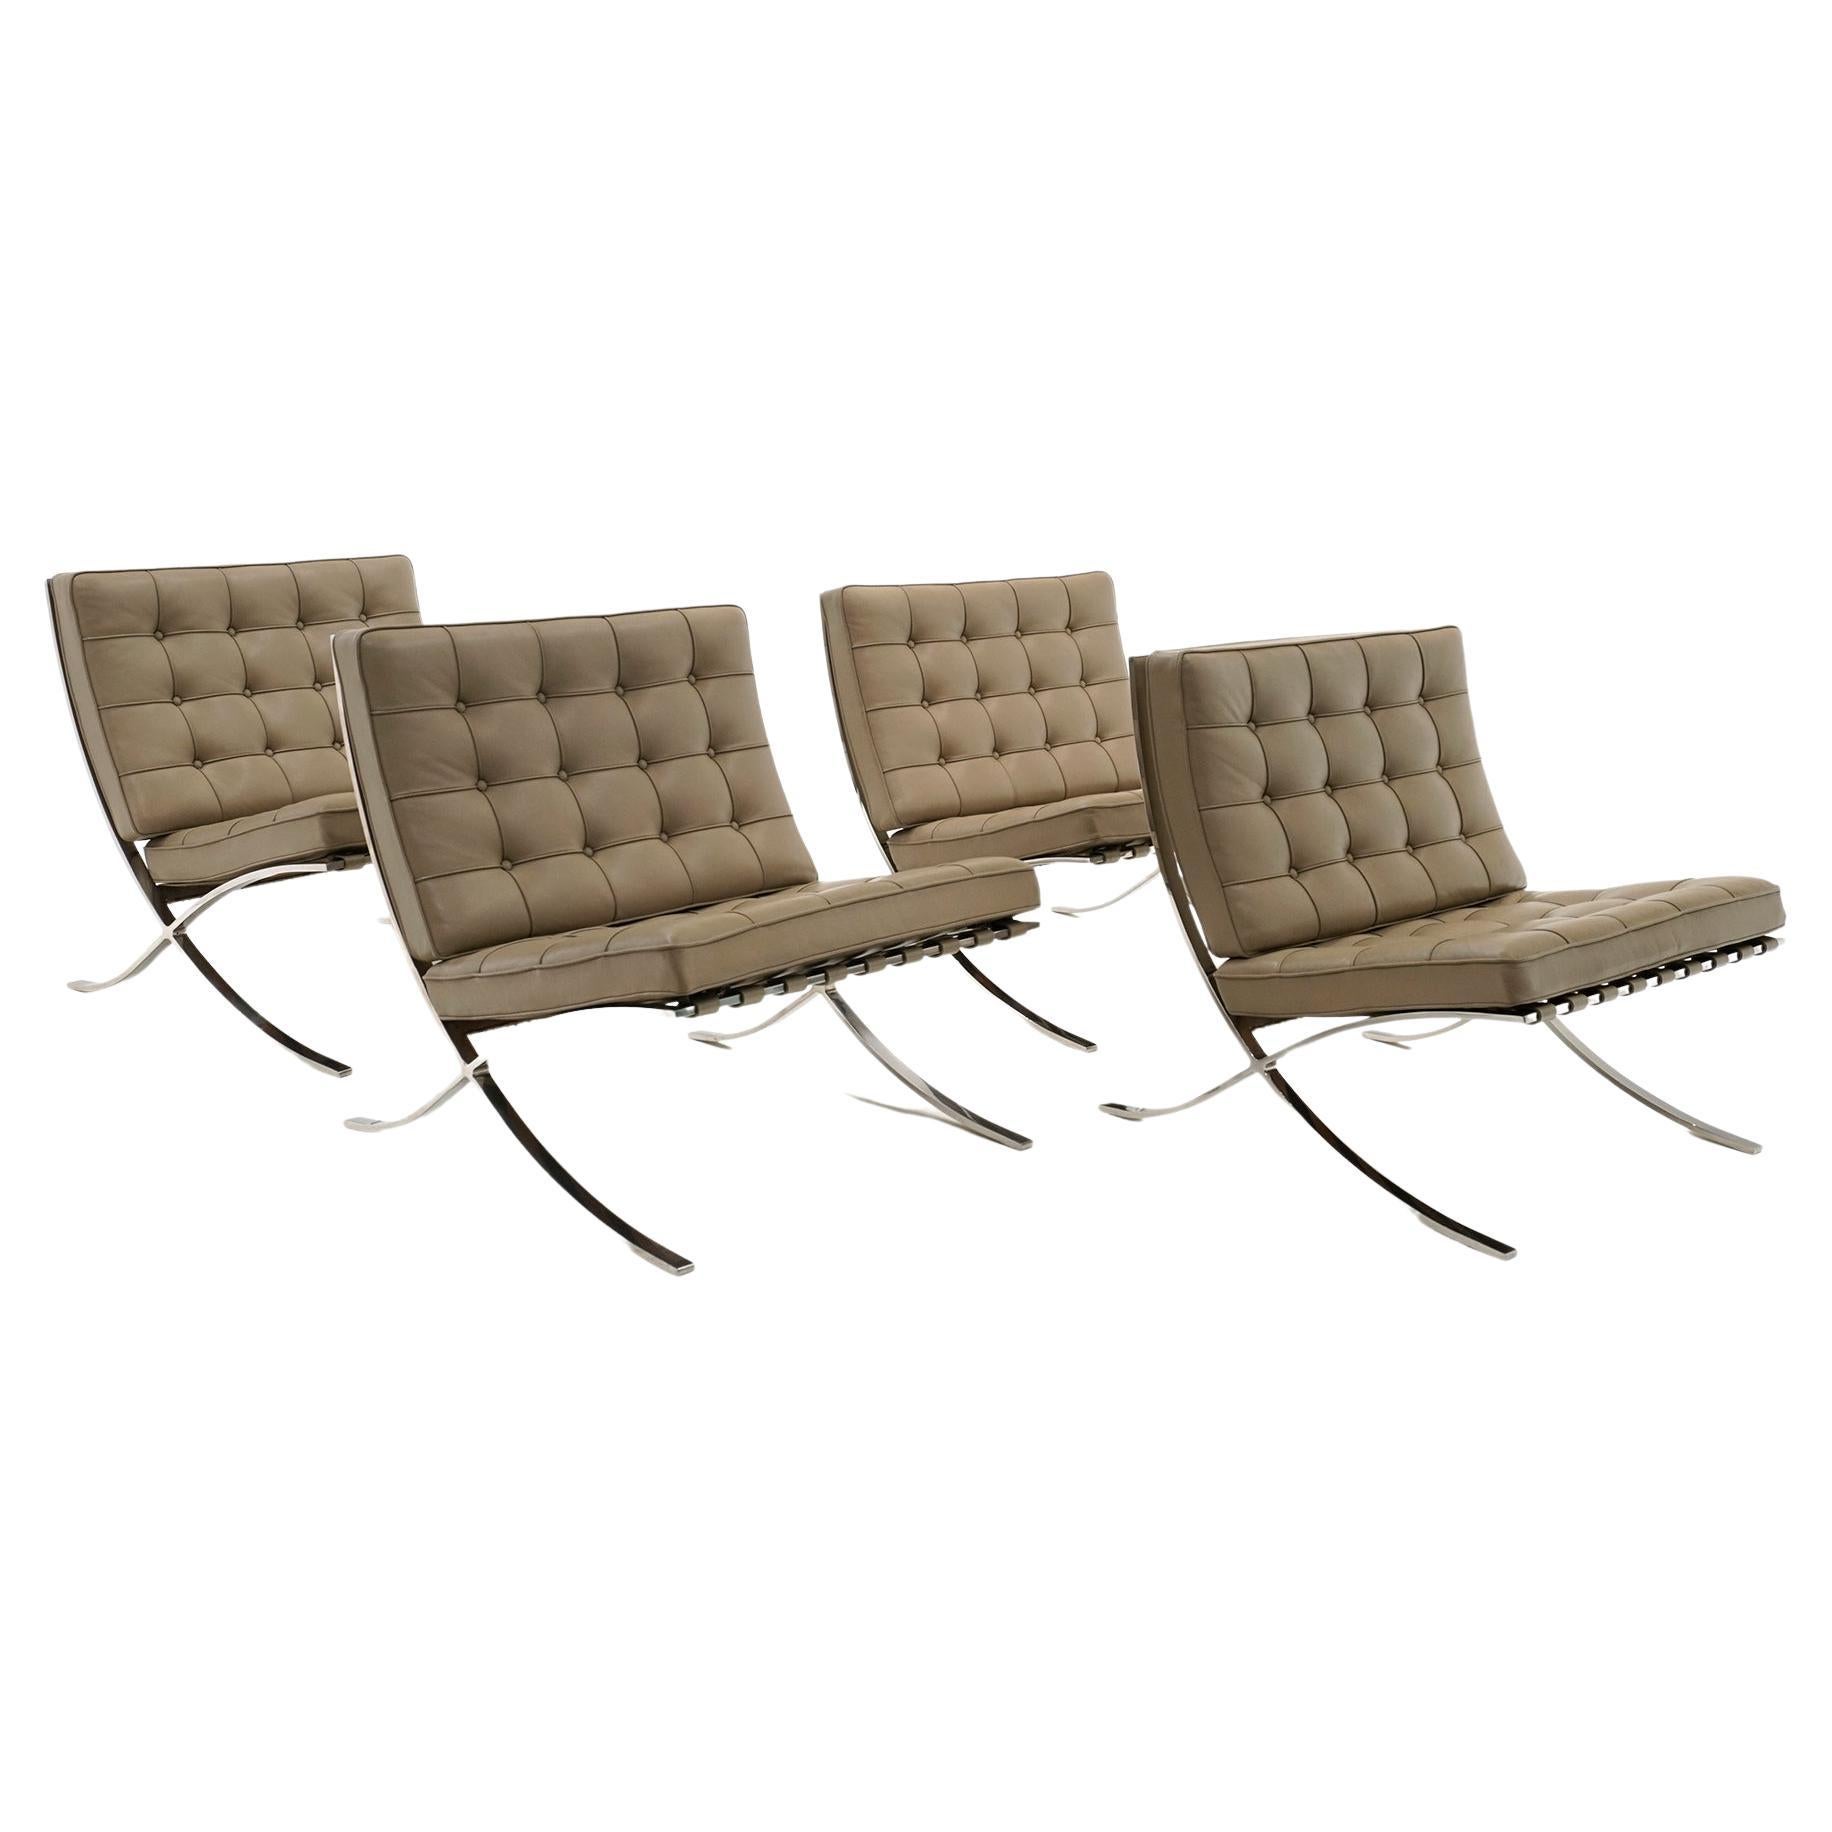 Knoll Barcelona Chairs by Ludwig Mies van der Rohe, Leather, Stainless Steel